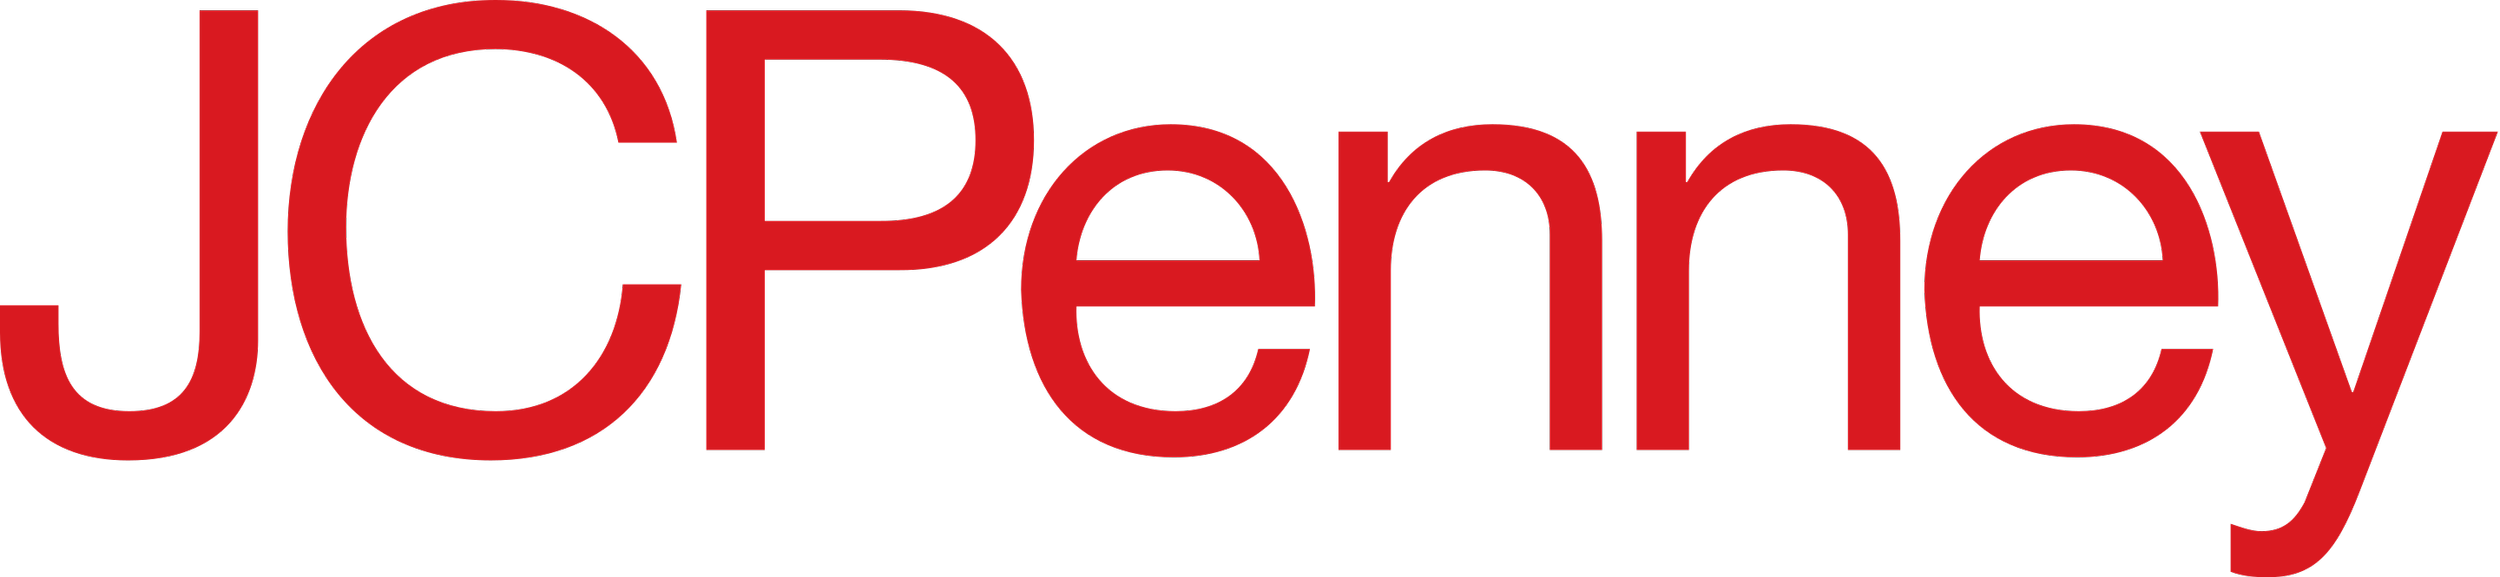 JCPenney_logo.svg.png